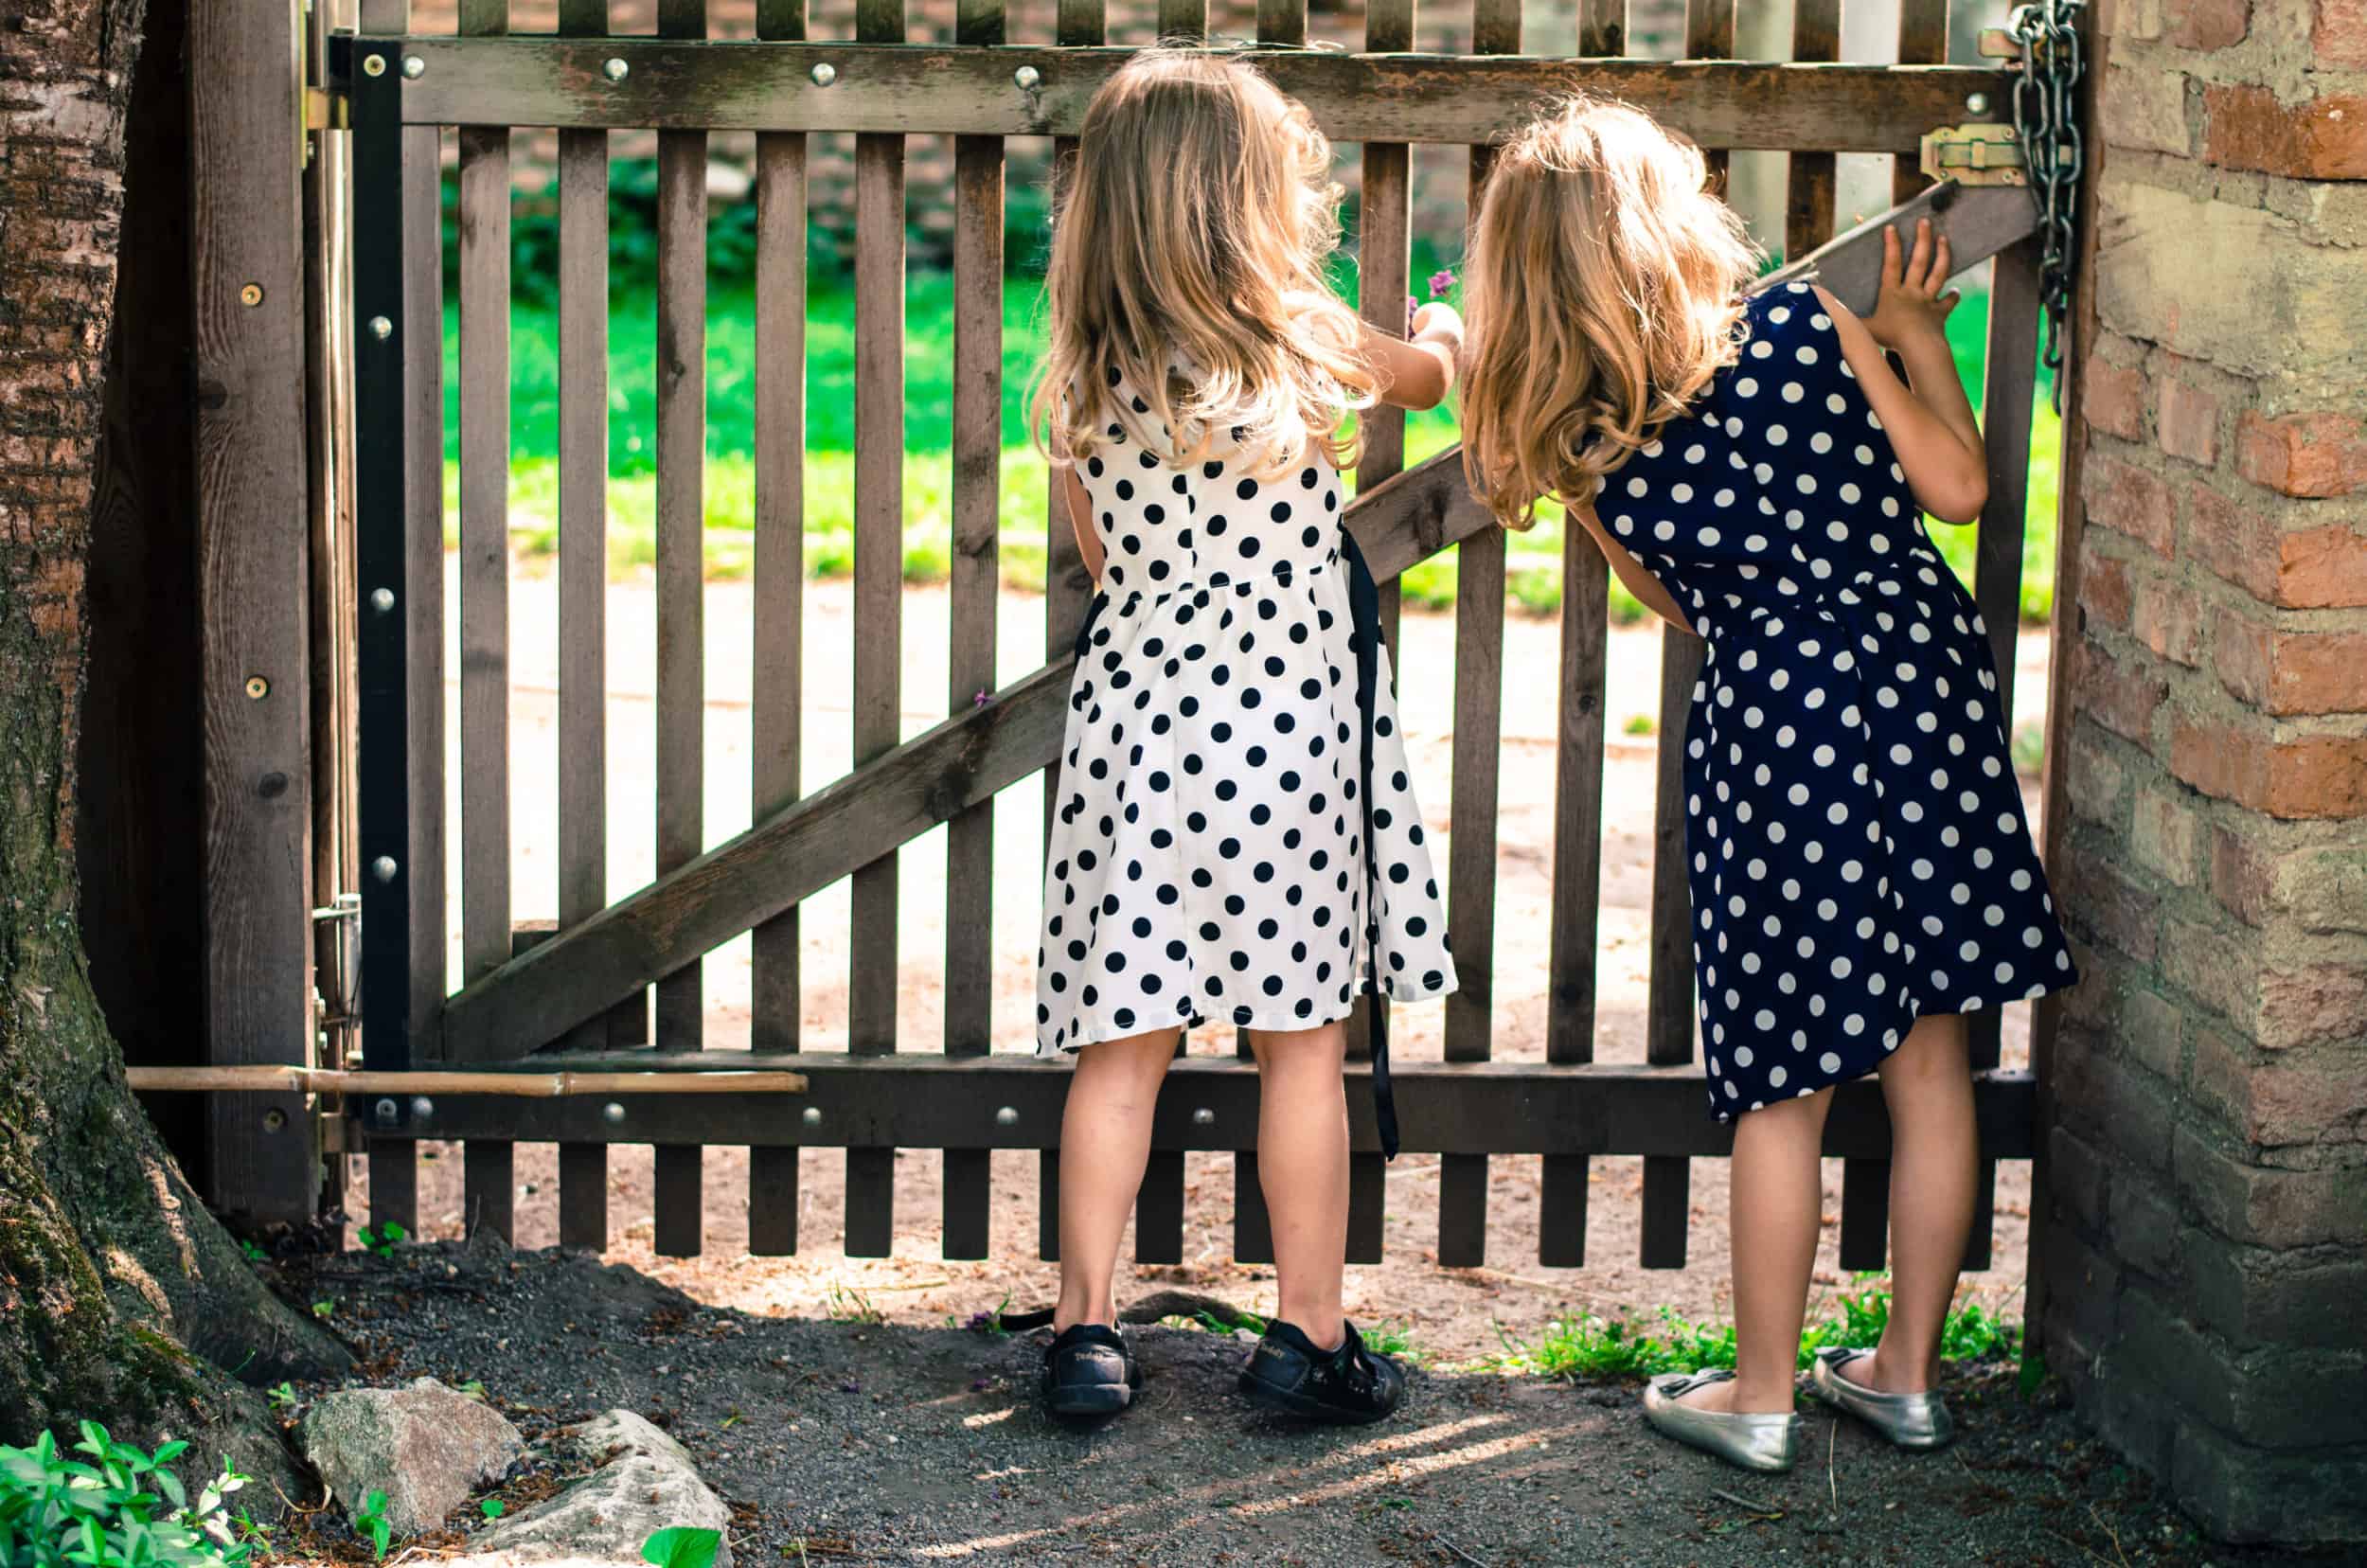 Child-safe Fencing: Balancing Security With Playful Design - Insights From Liberty Fence